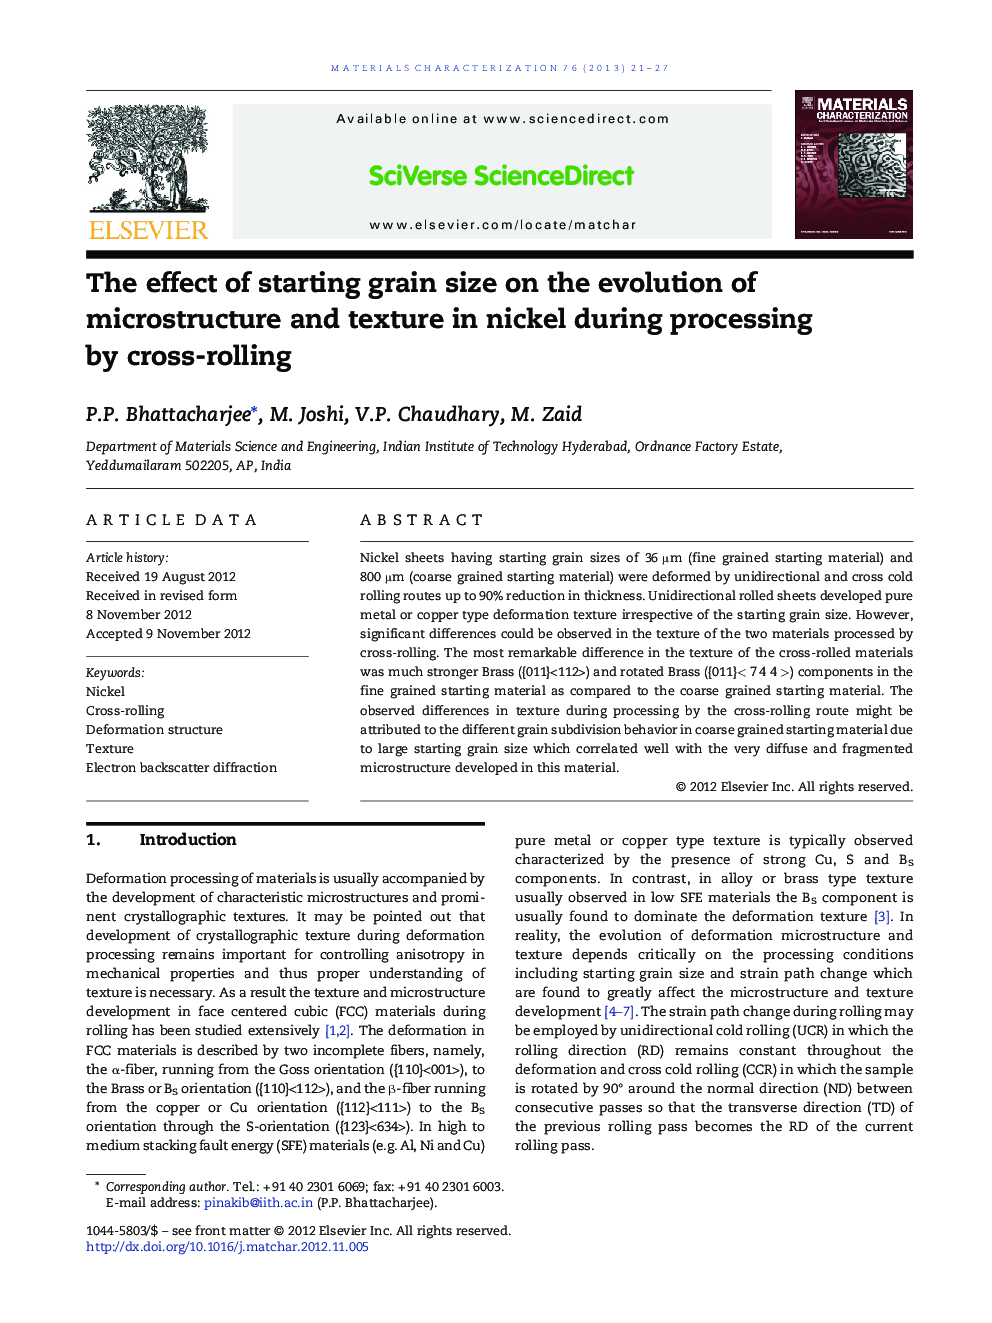 The effect of starting grain size on the evolution of microstructure and texture in nickel during processing by cross-rolling